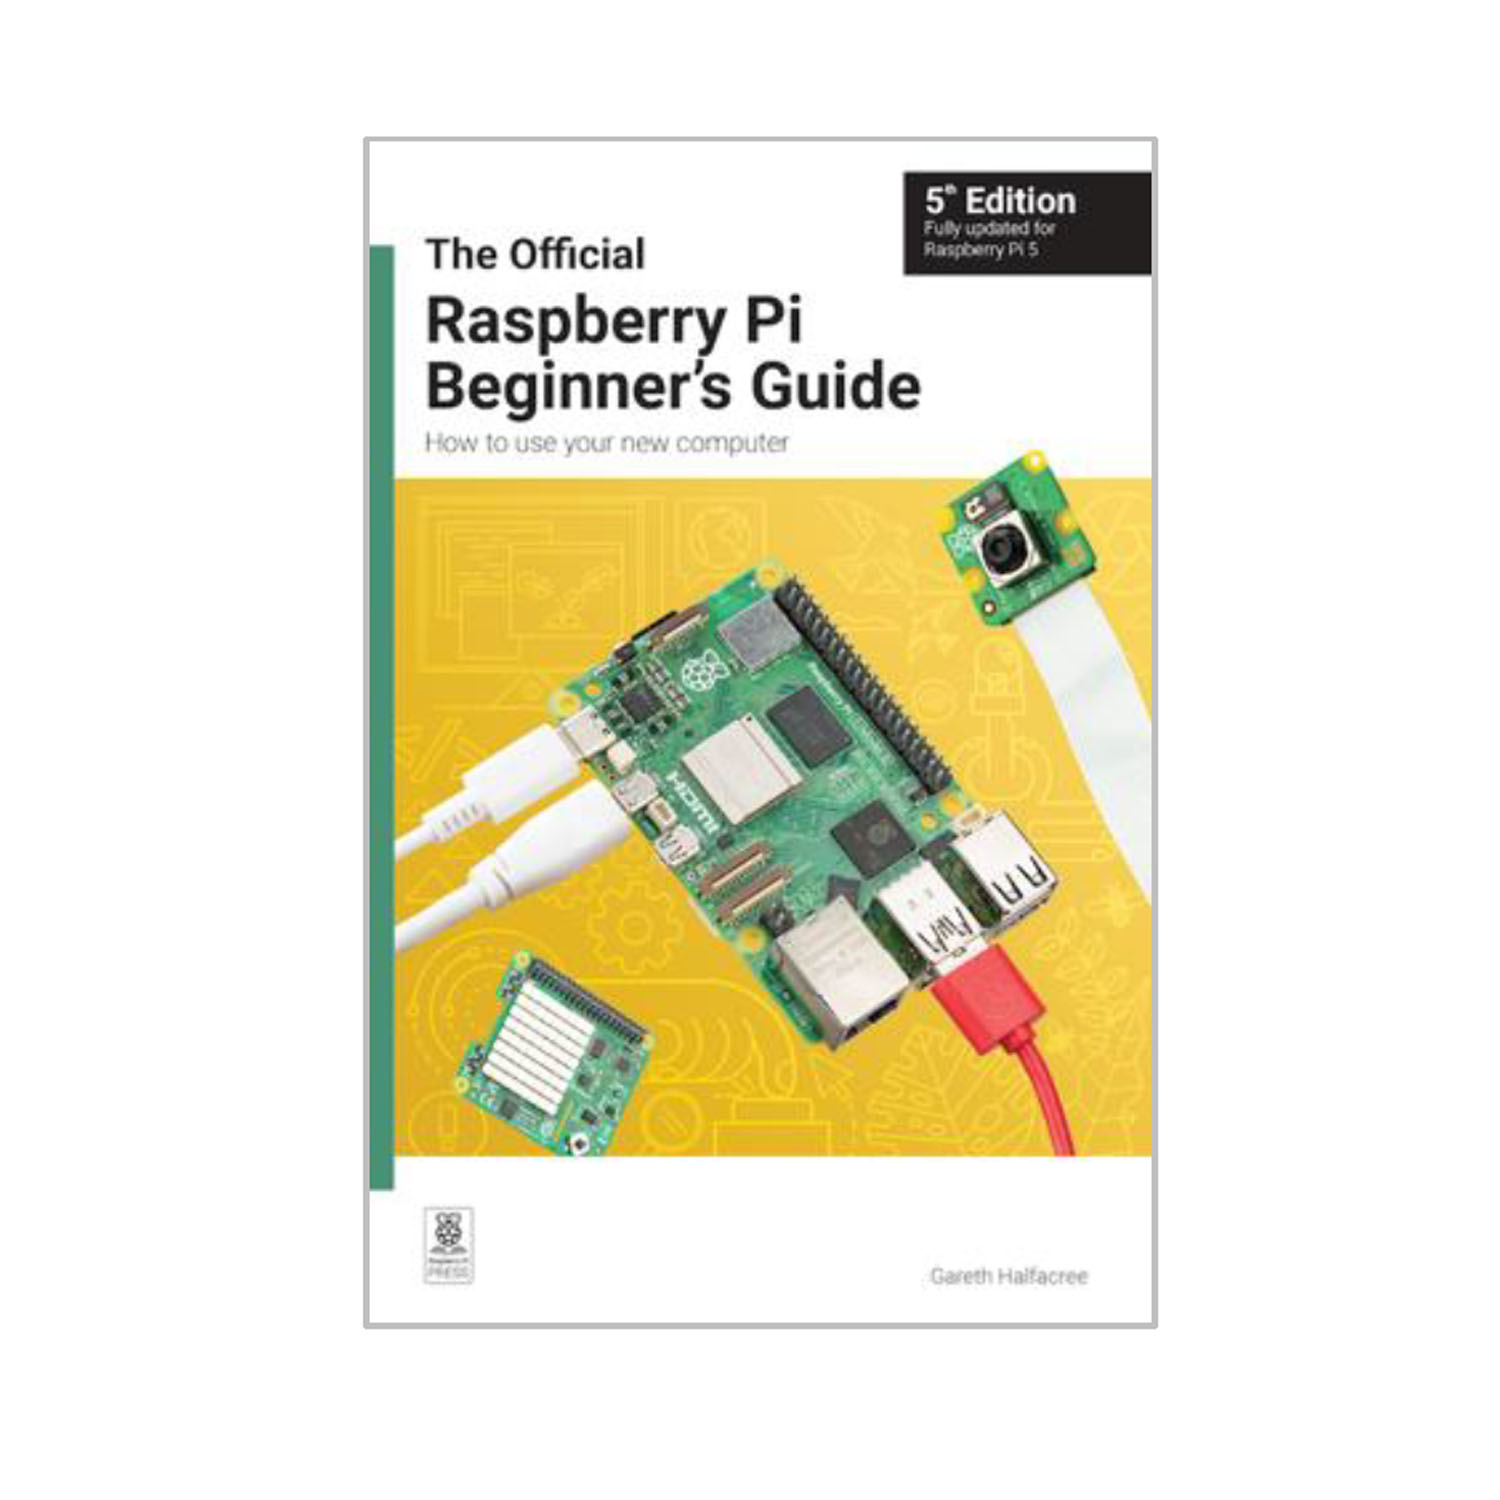 Raspberry Pi Beginners Guide (5th Edition)